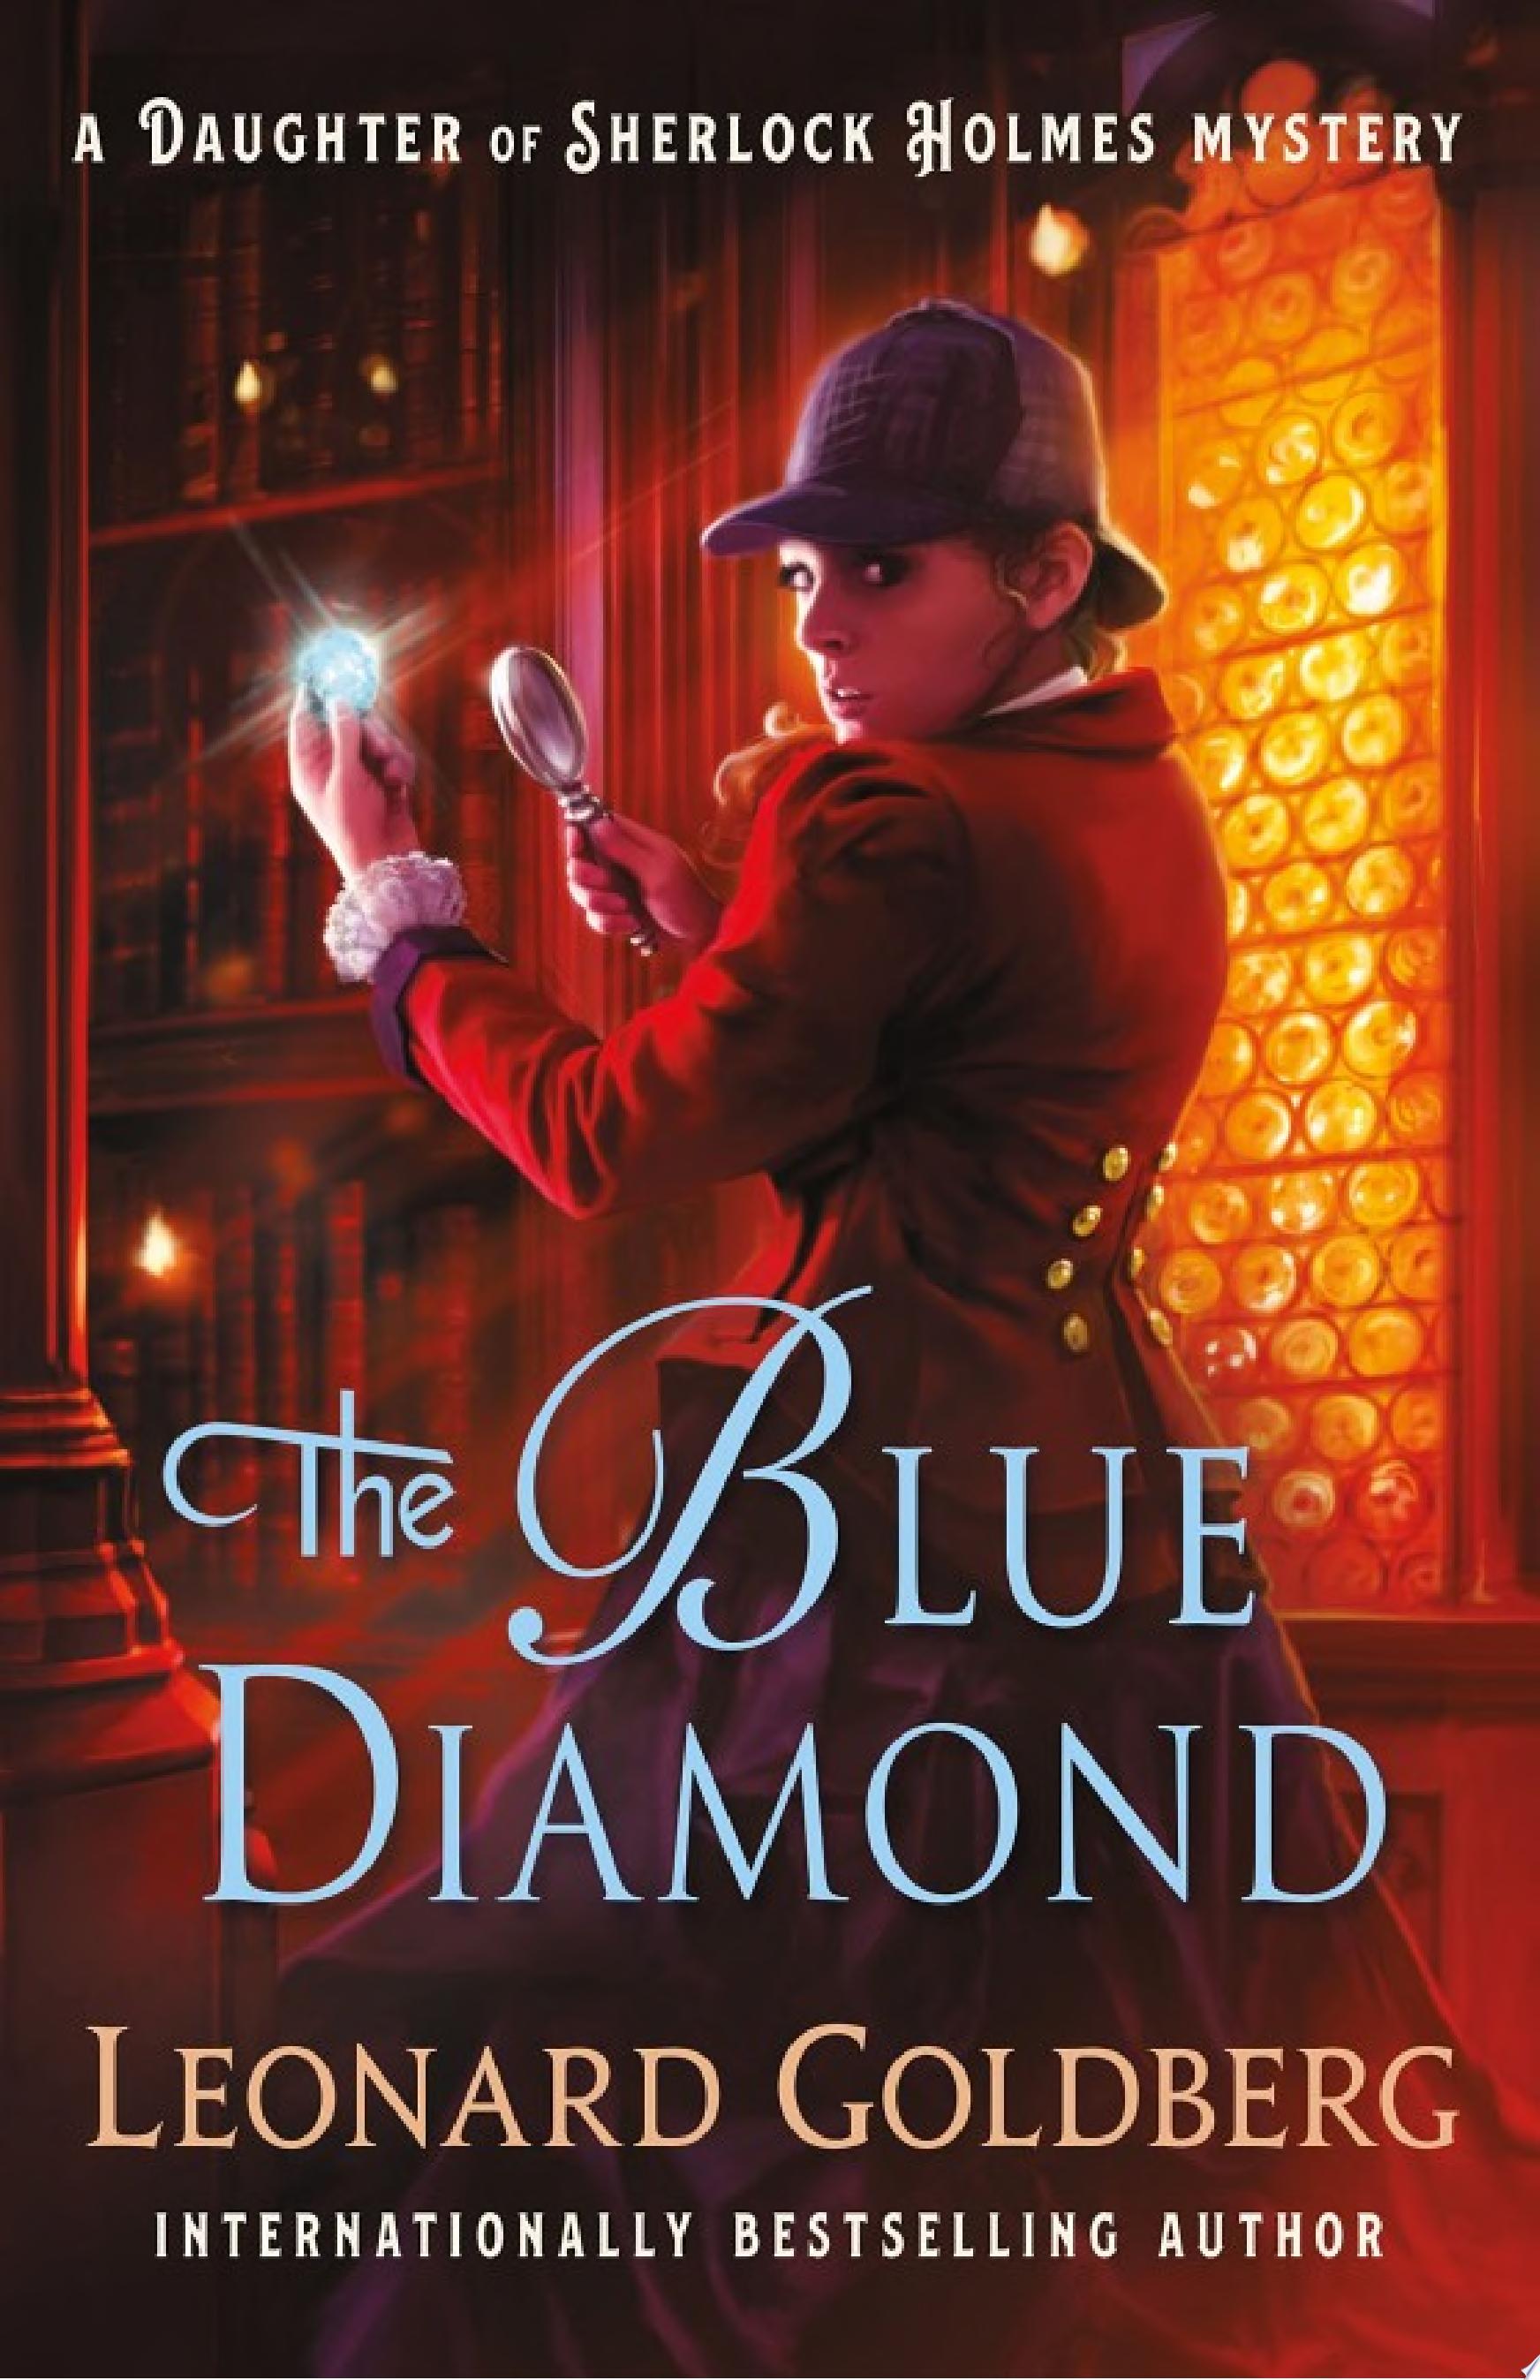 Image for "The Blue Diamond"